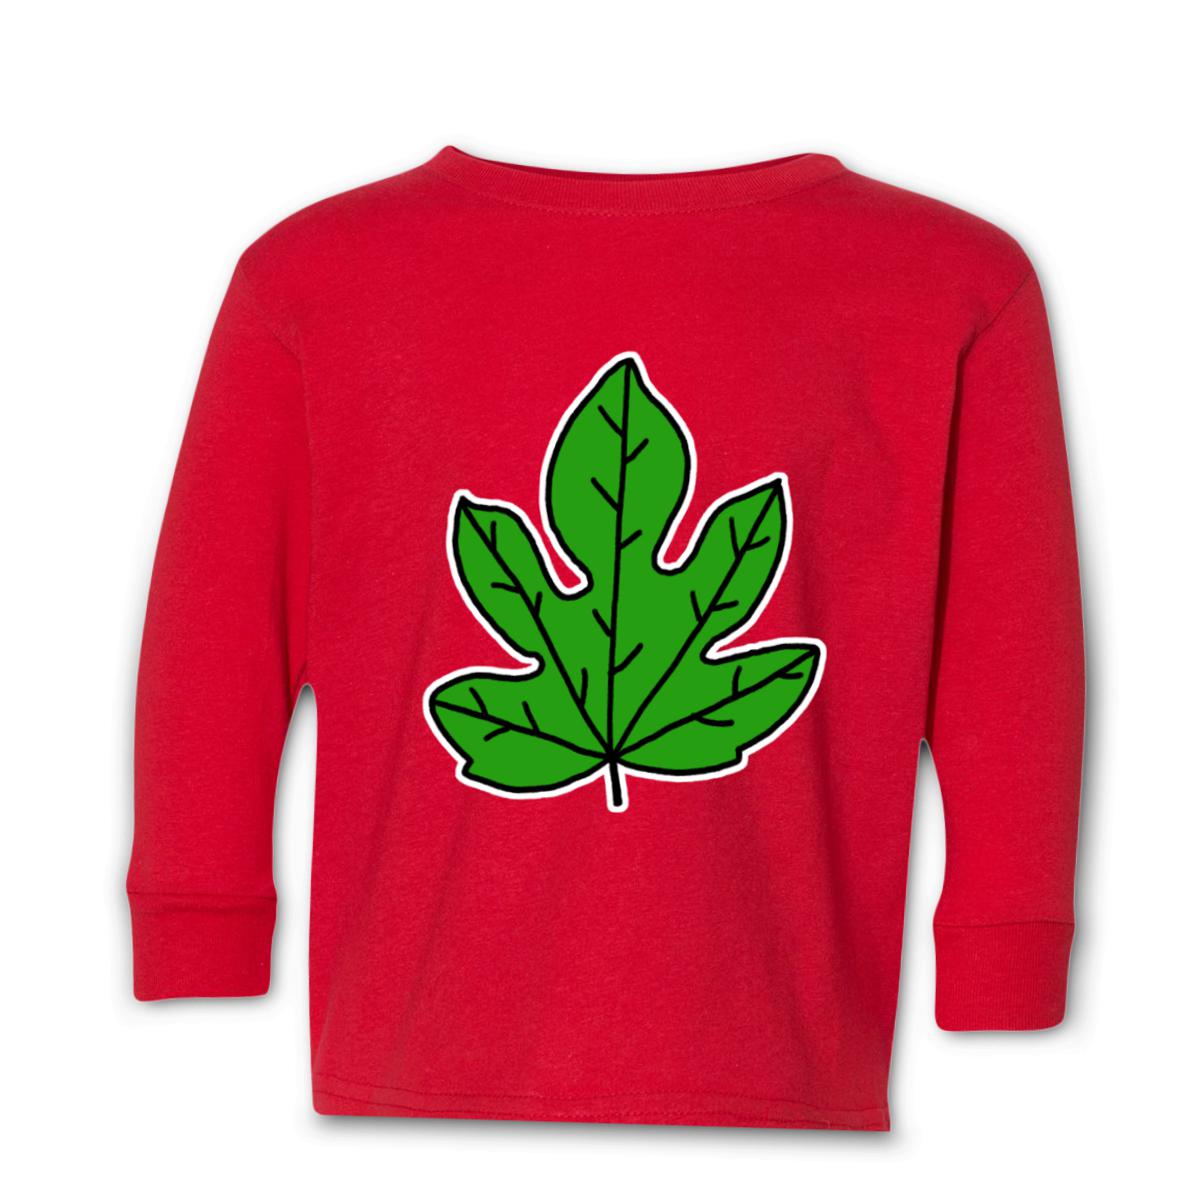 Fig Leaf Toddler Long Sleeve Tee 2T red